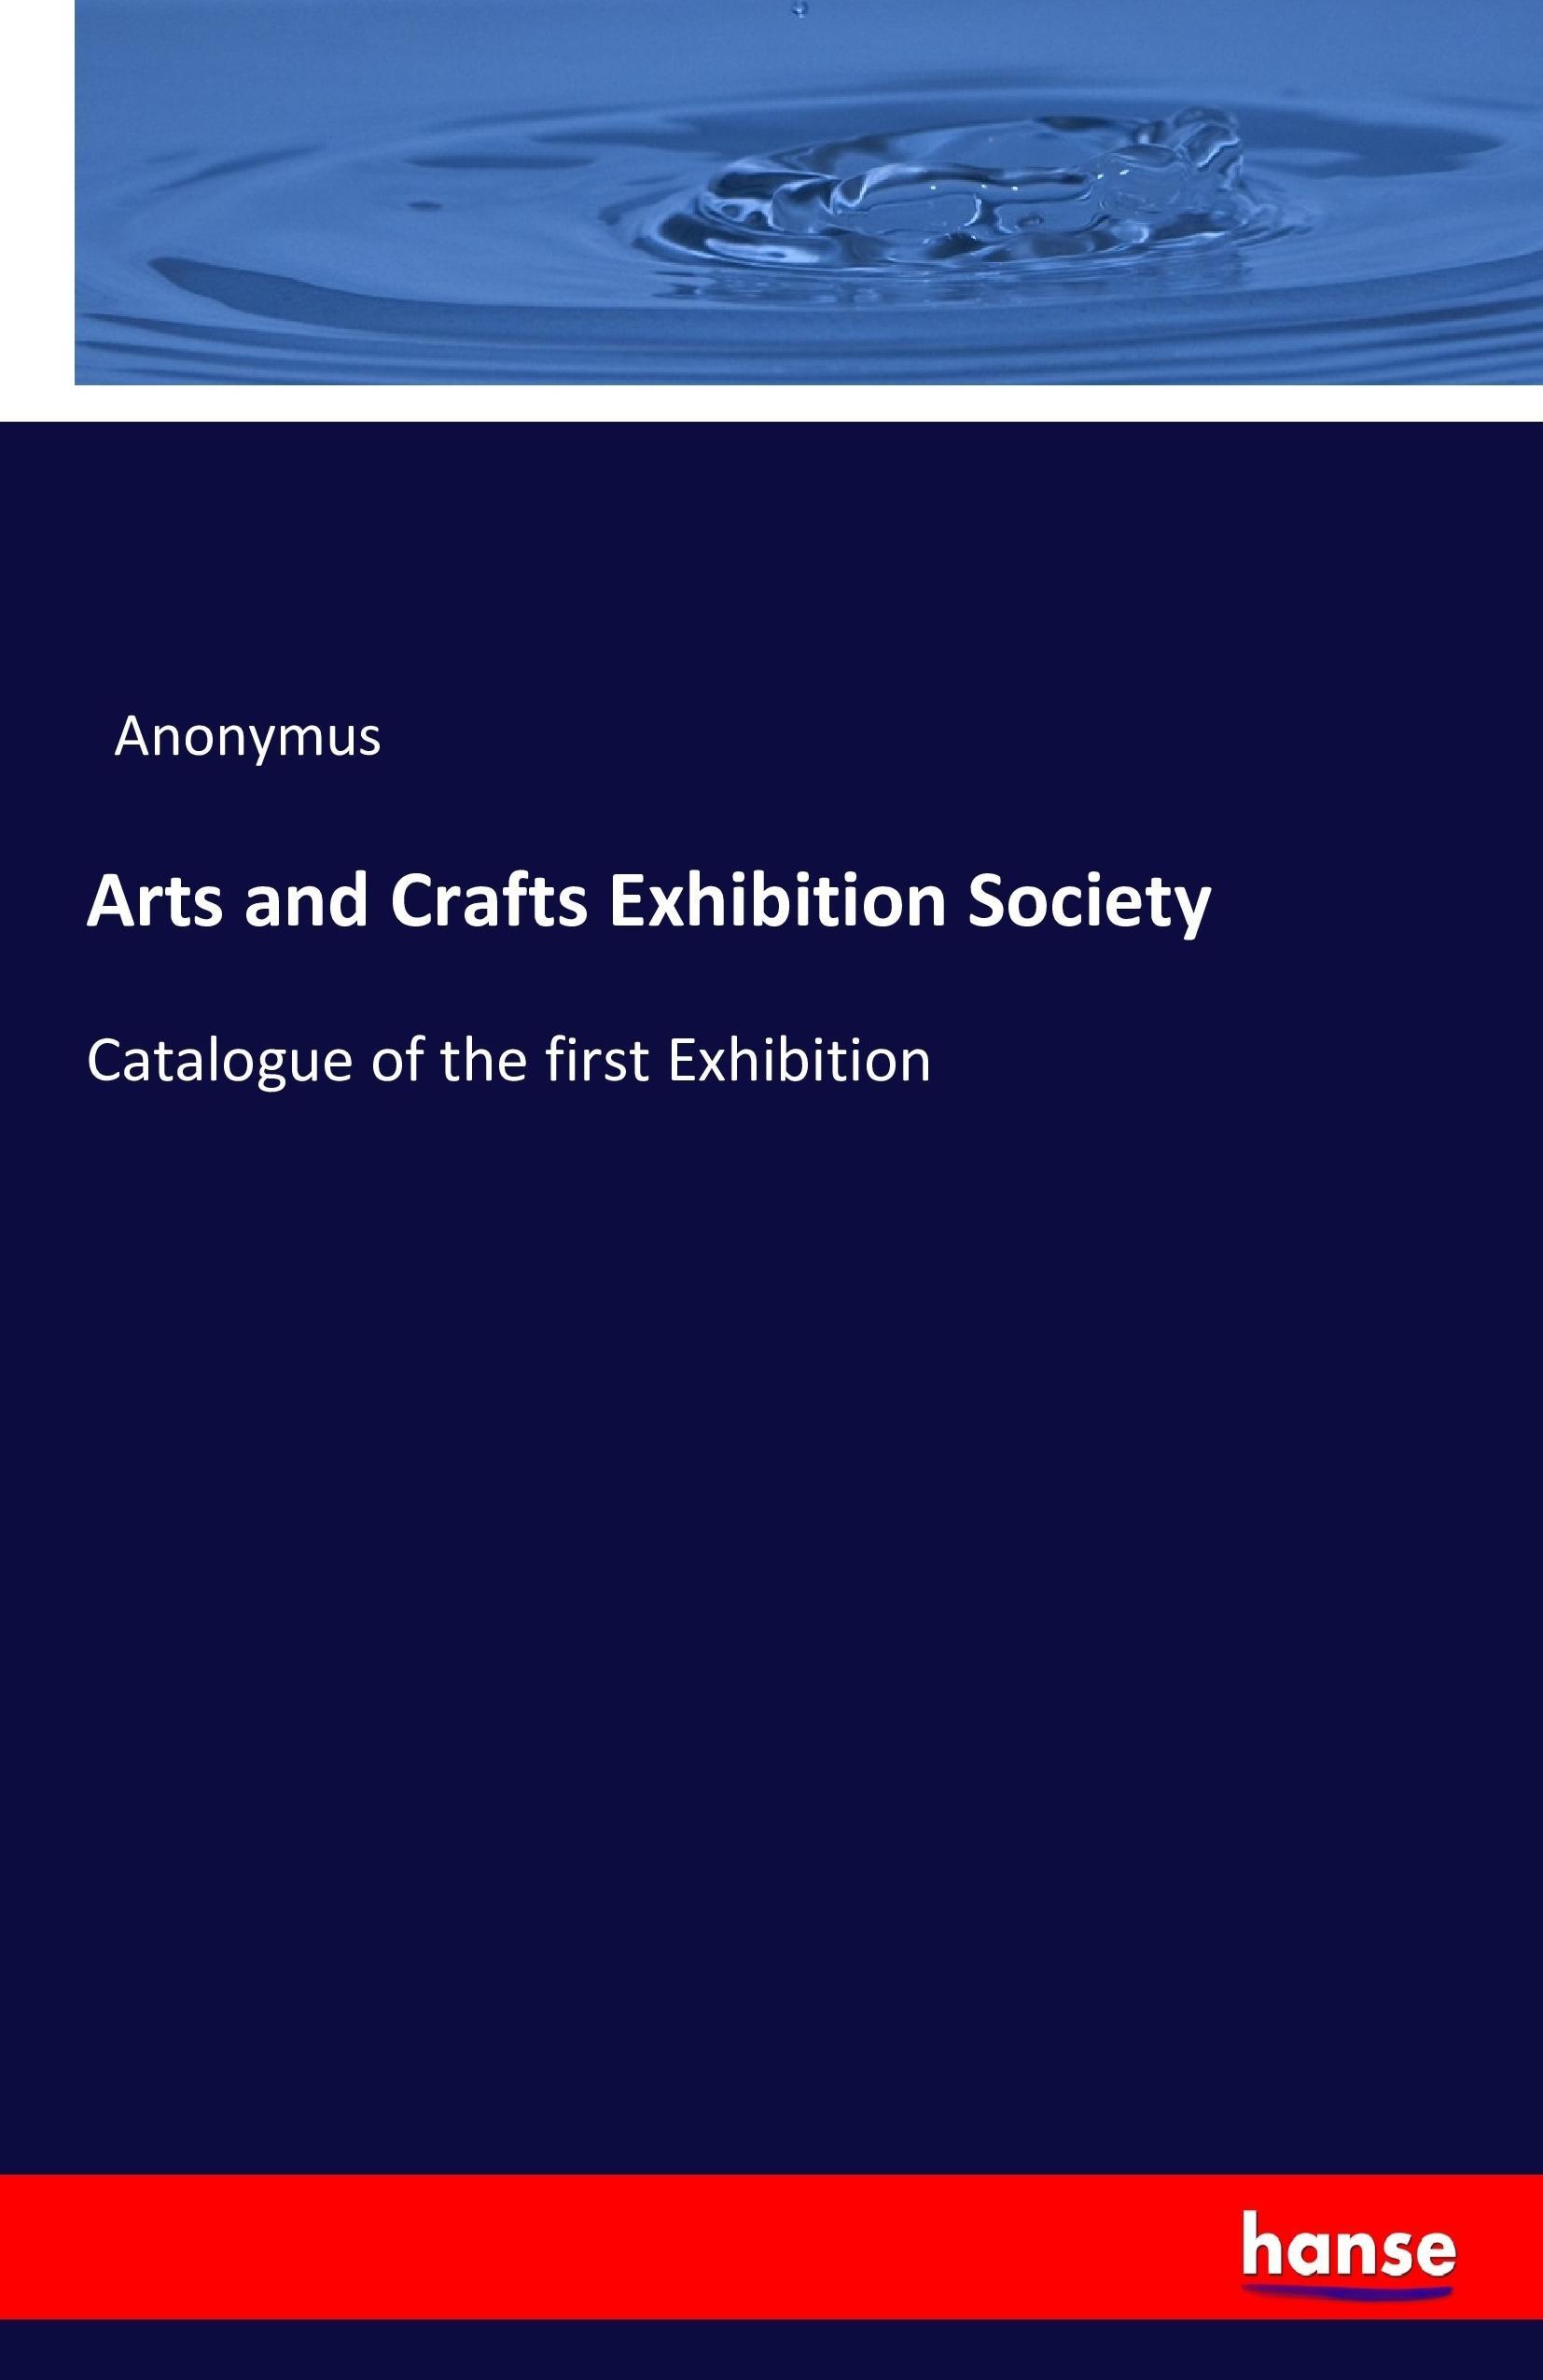 Arts and Crafts Exhibition Society | Catalogue of the first Exhibition | Anonymus | Taschenbuch | Paperback | 212 S. | Englisch | 2016 | hansebooks | EAN 9783742816764 - Anonymus